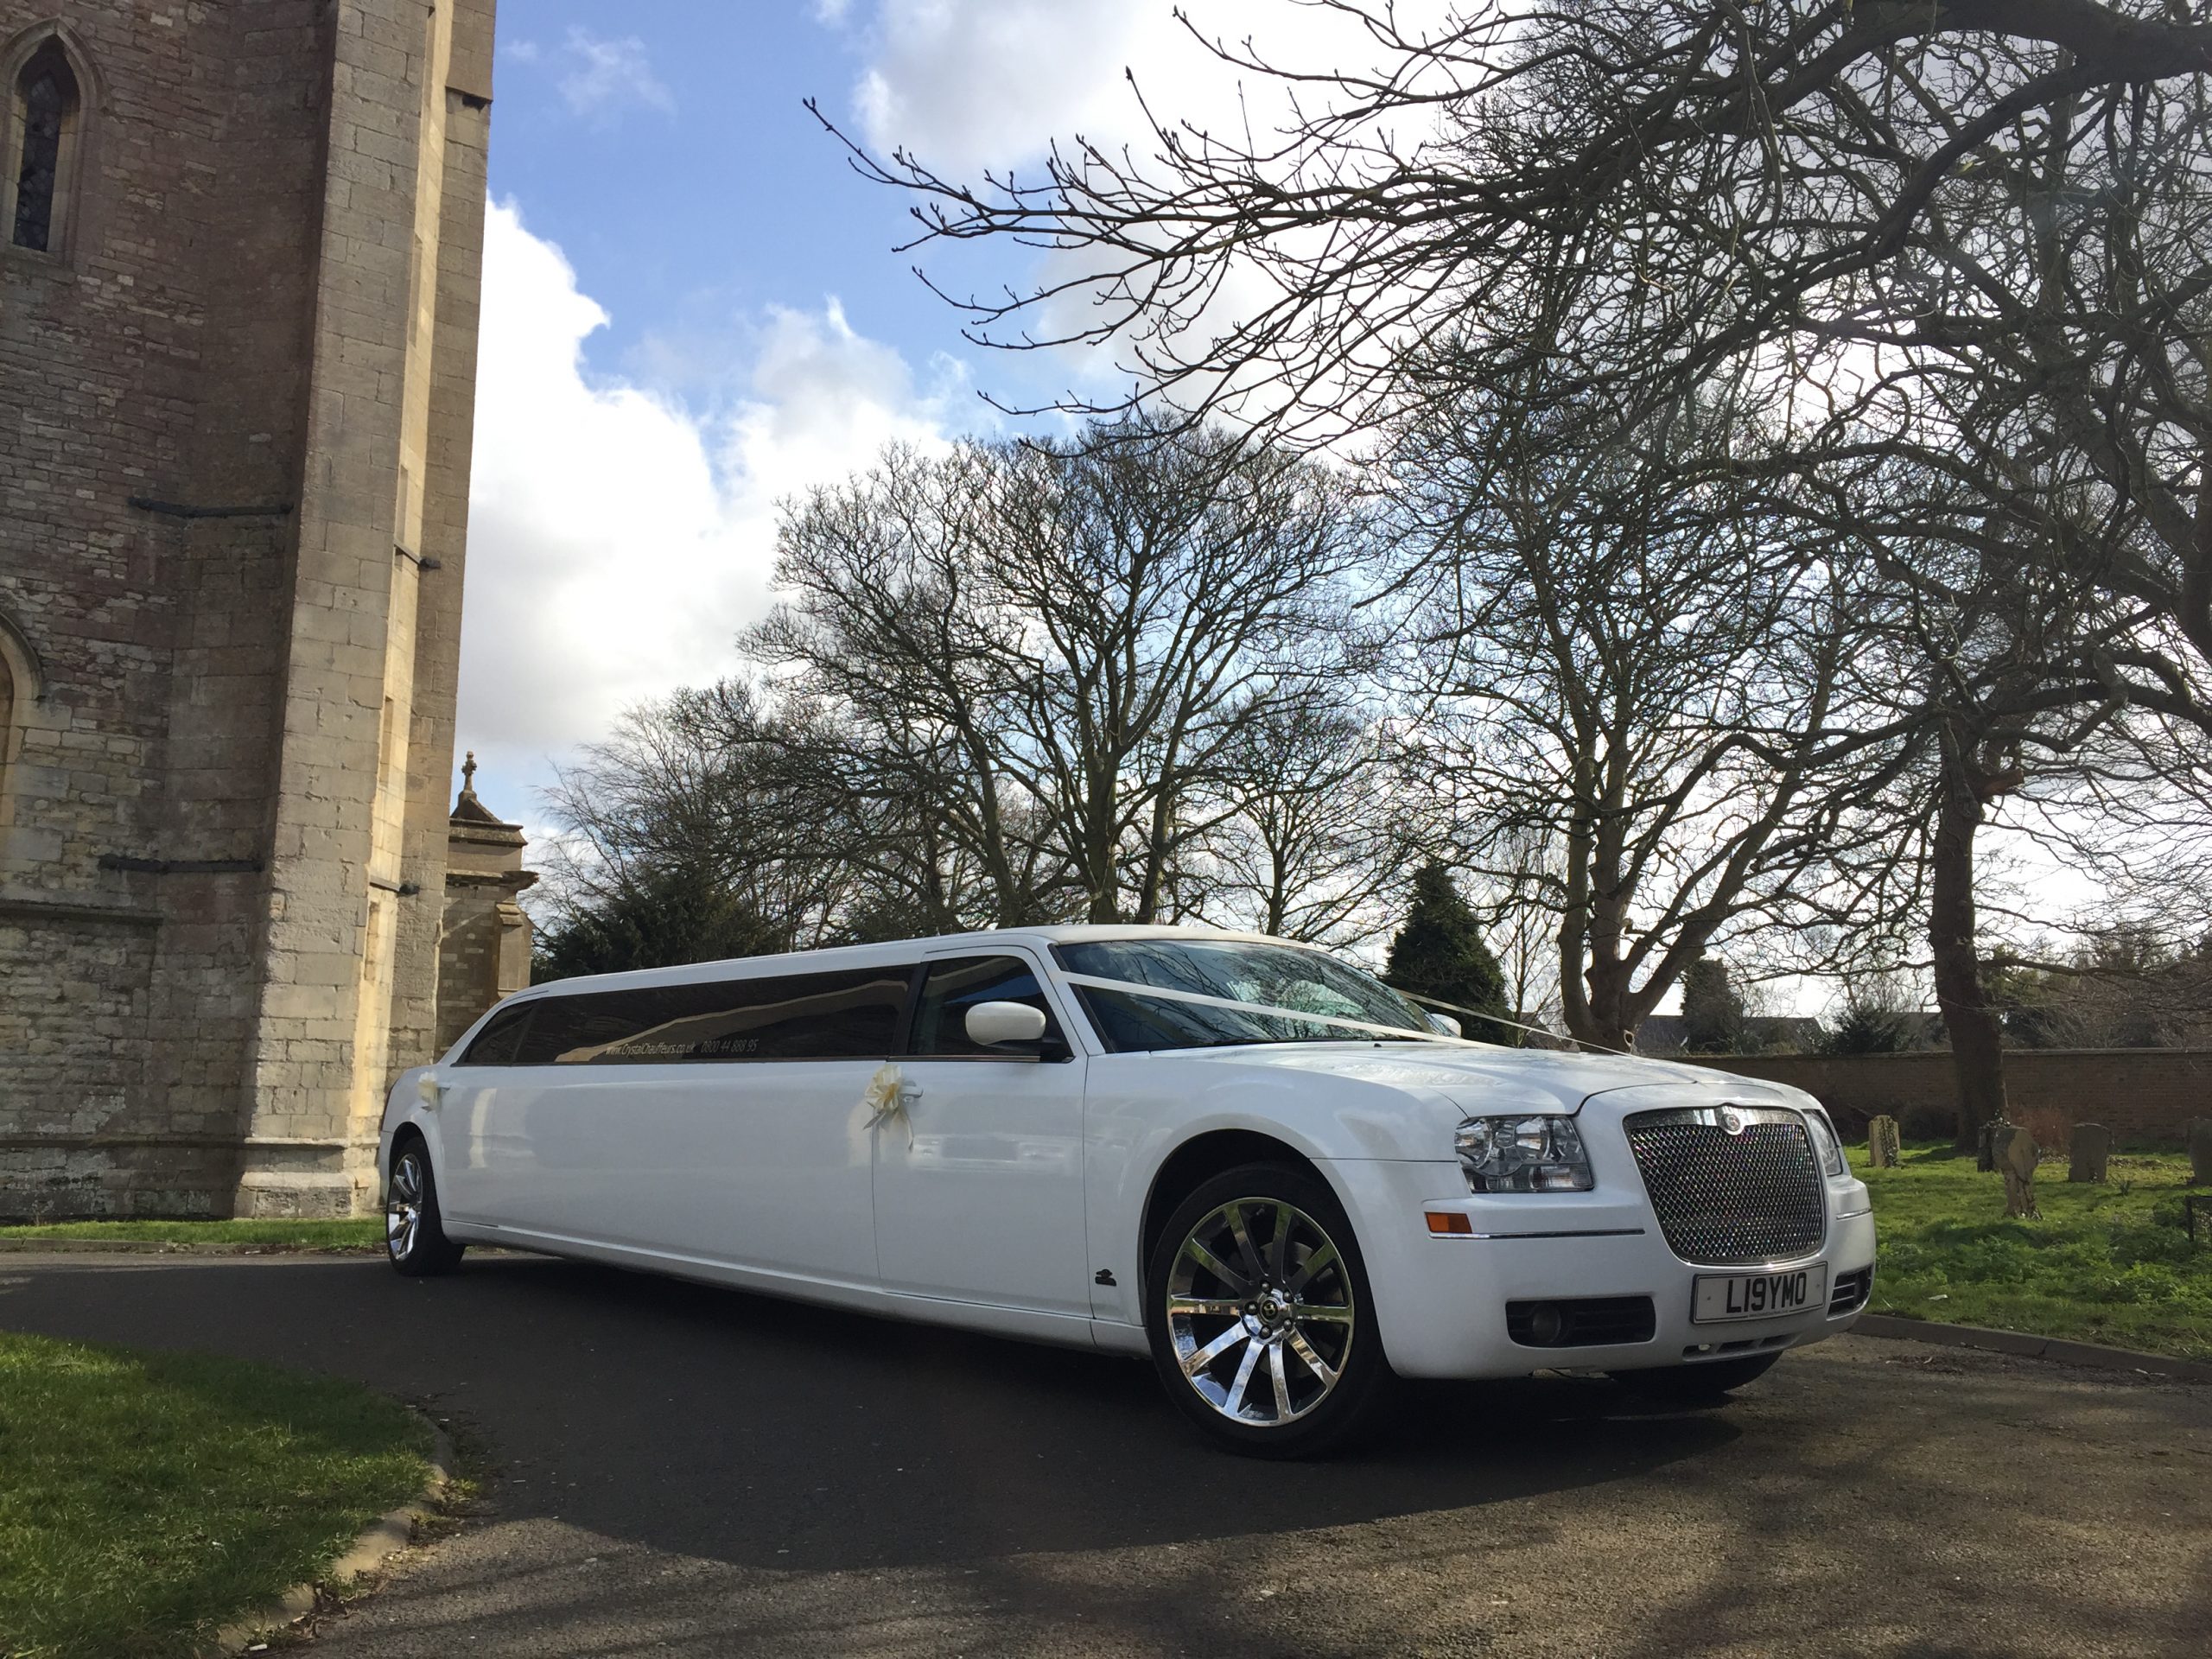 Wedding Limo Hire Chatteris